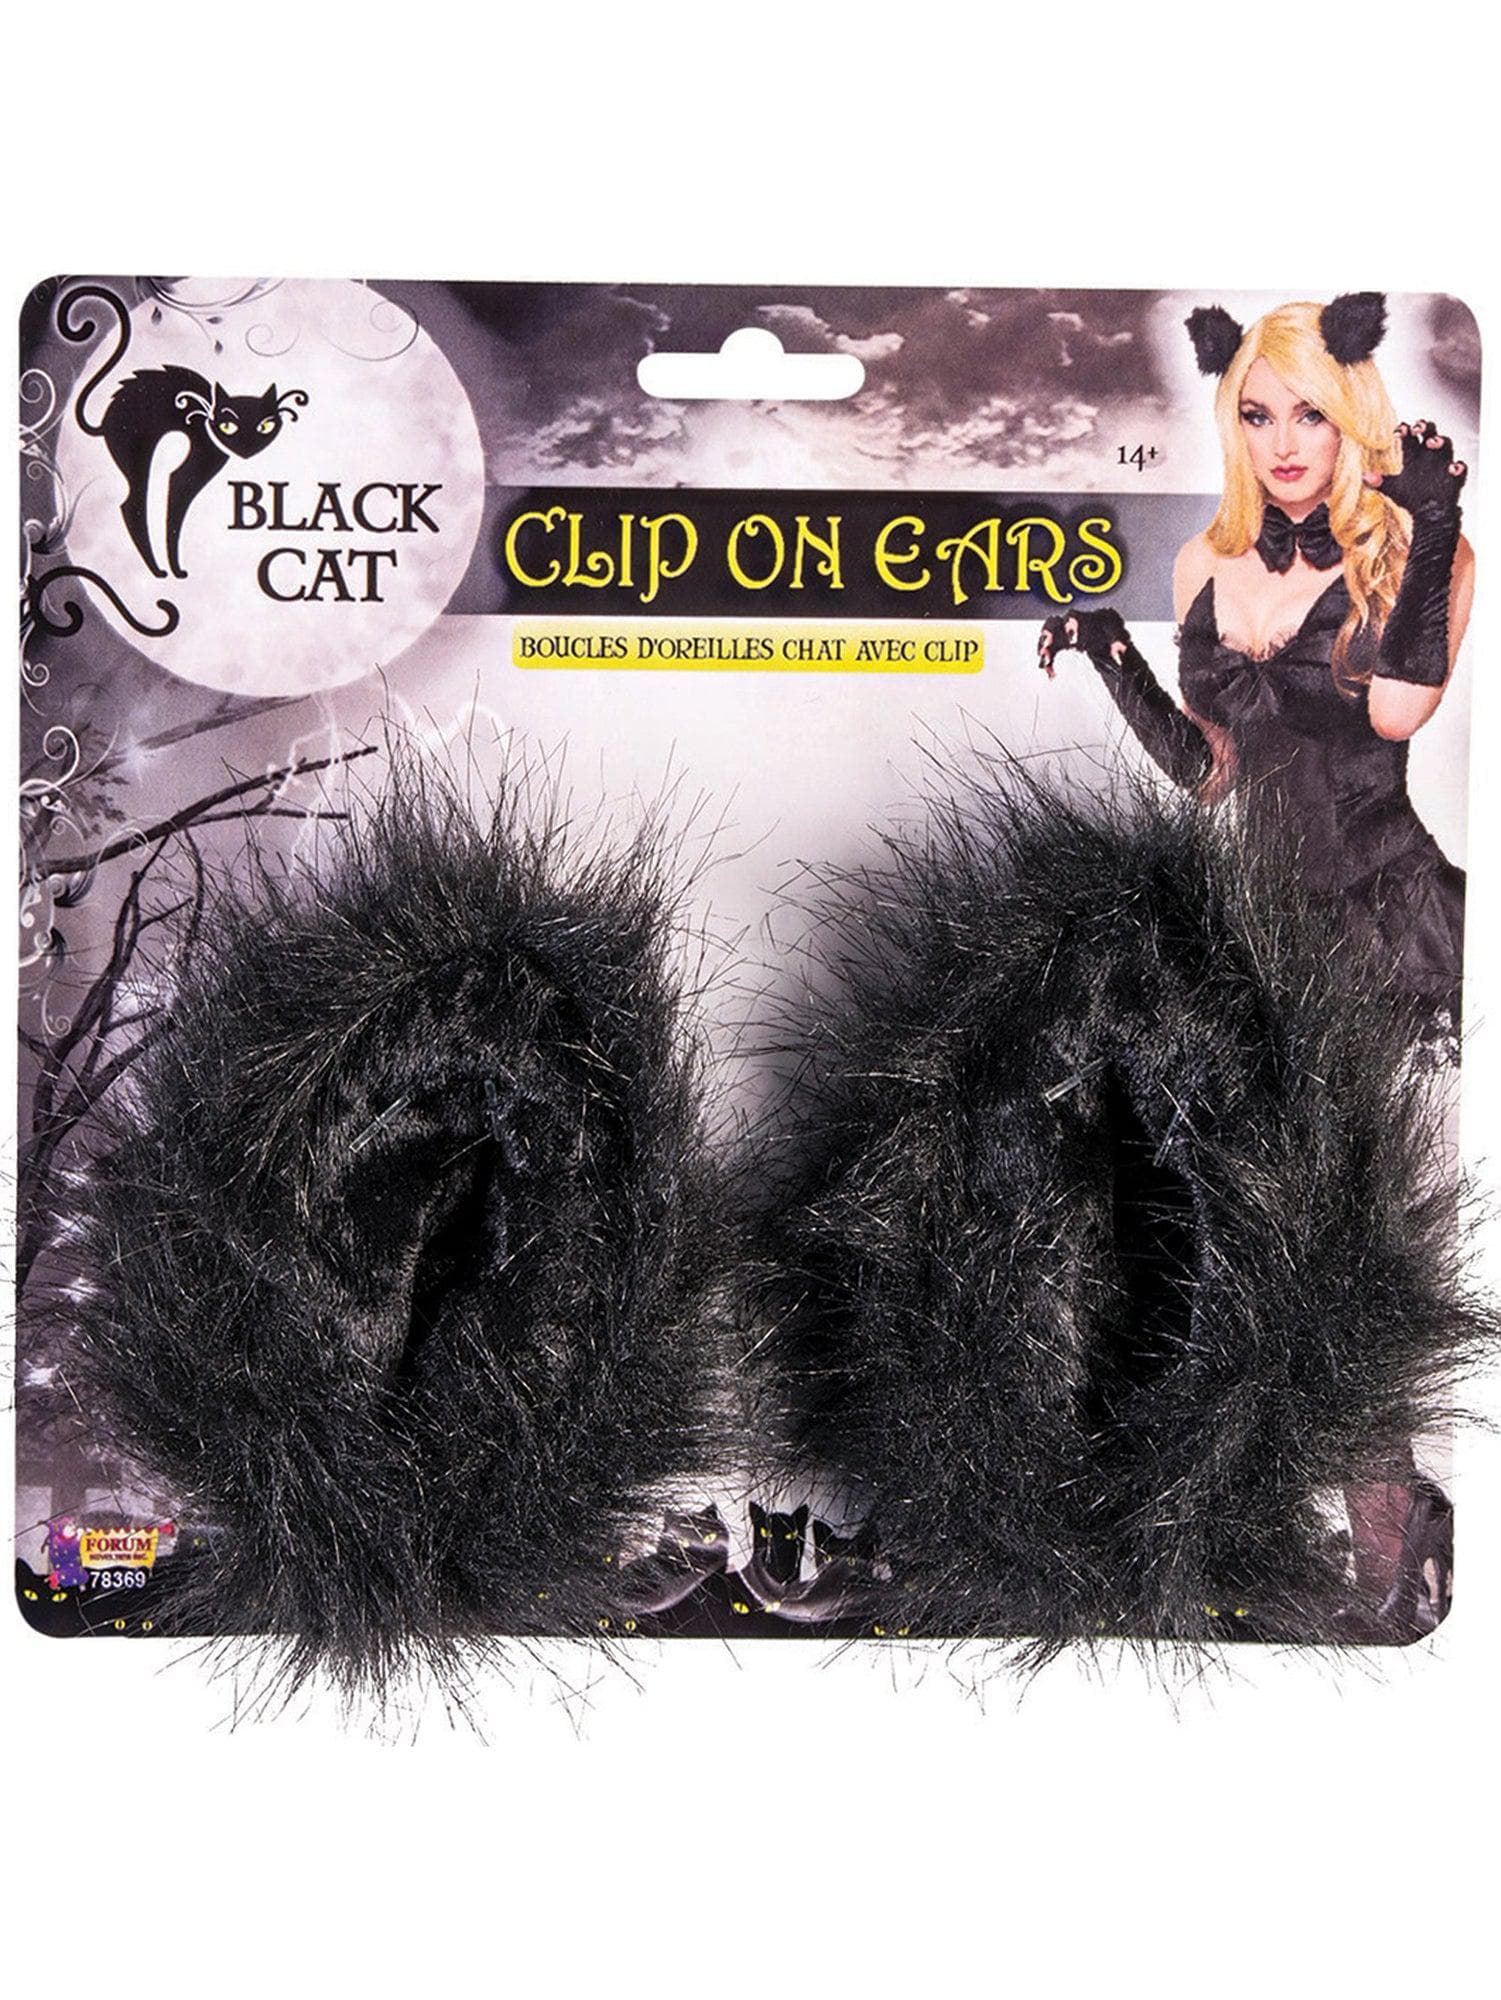 Black Cat Clip on Ears One Size - costumes.com